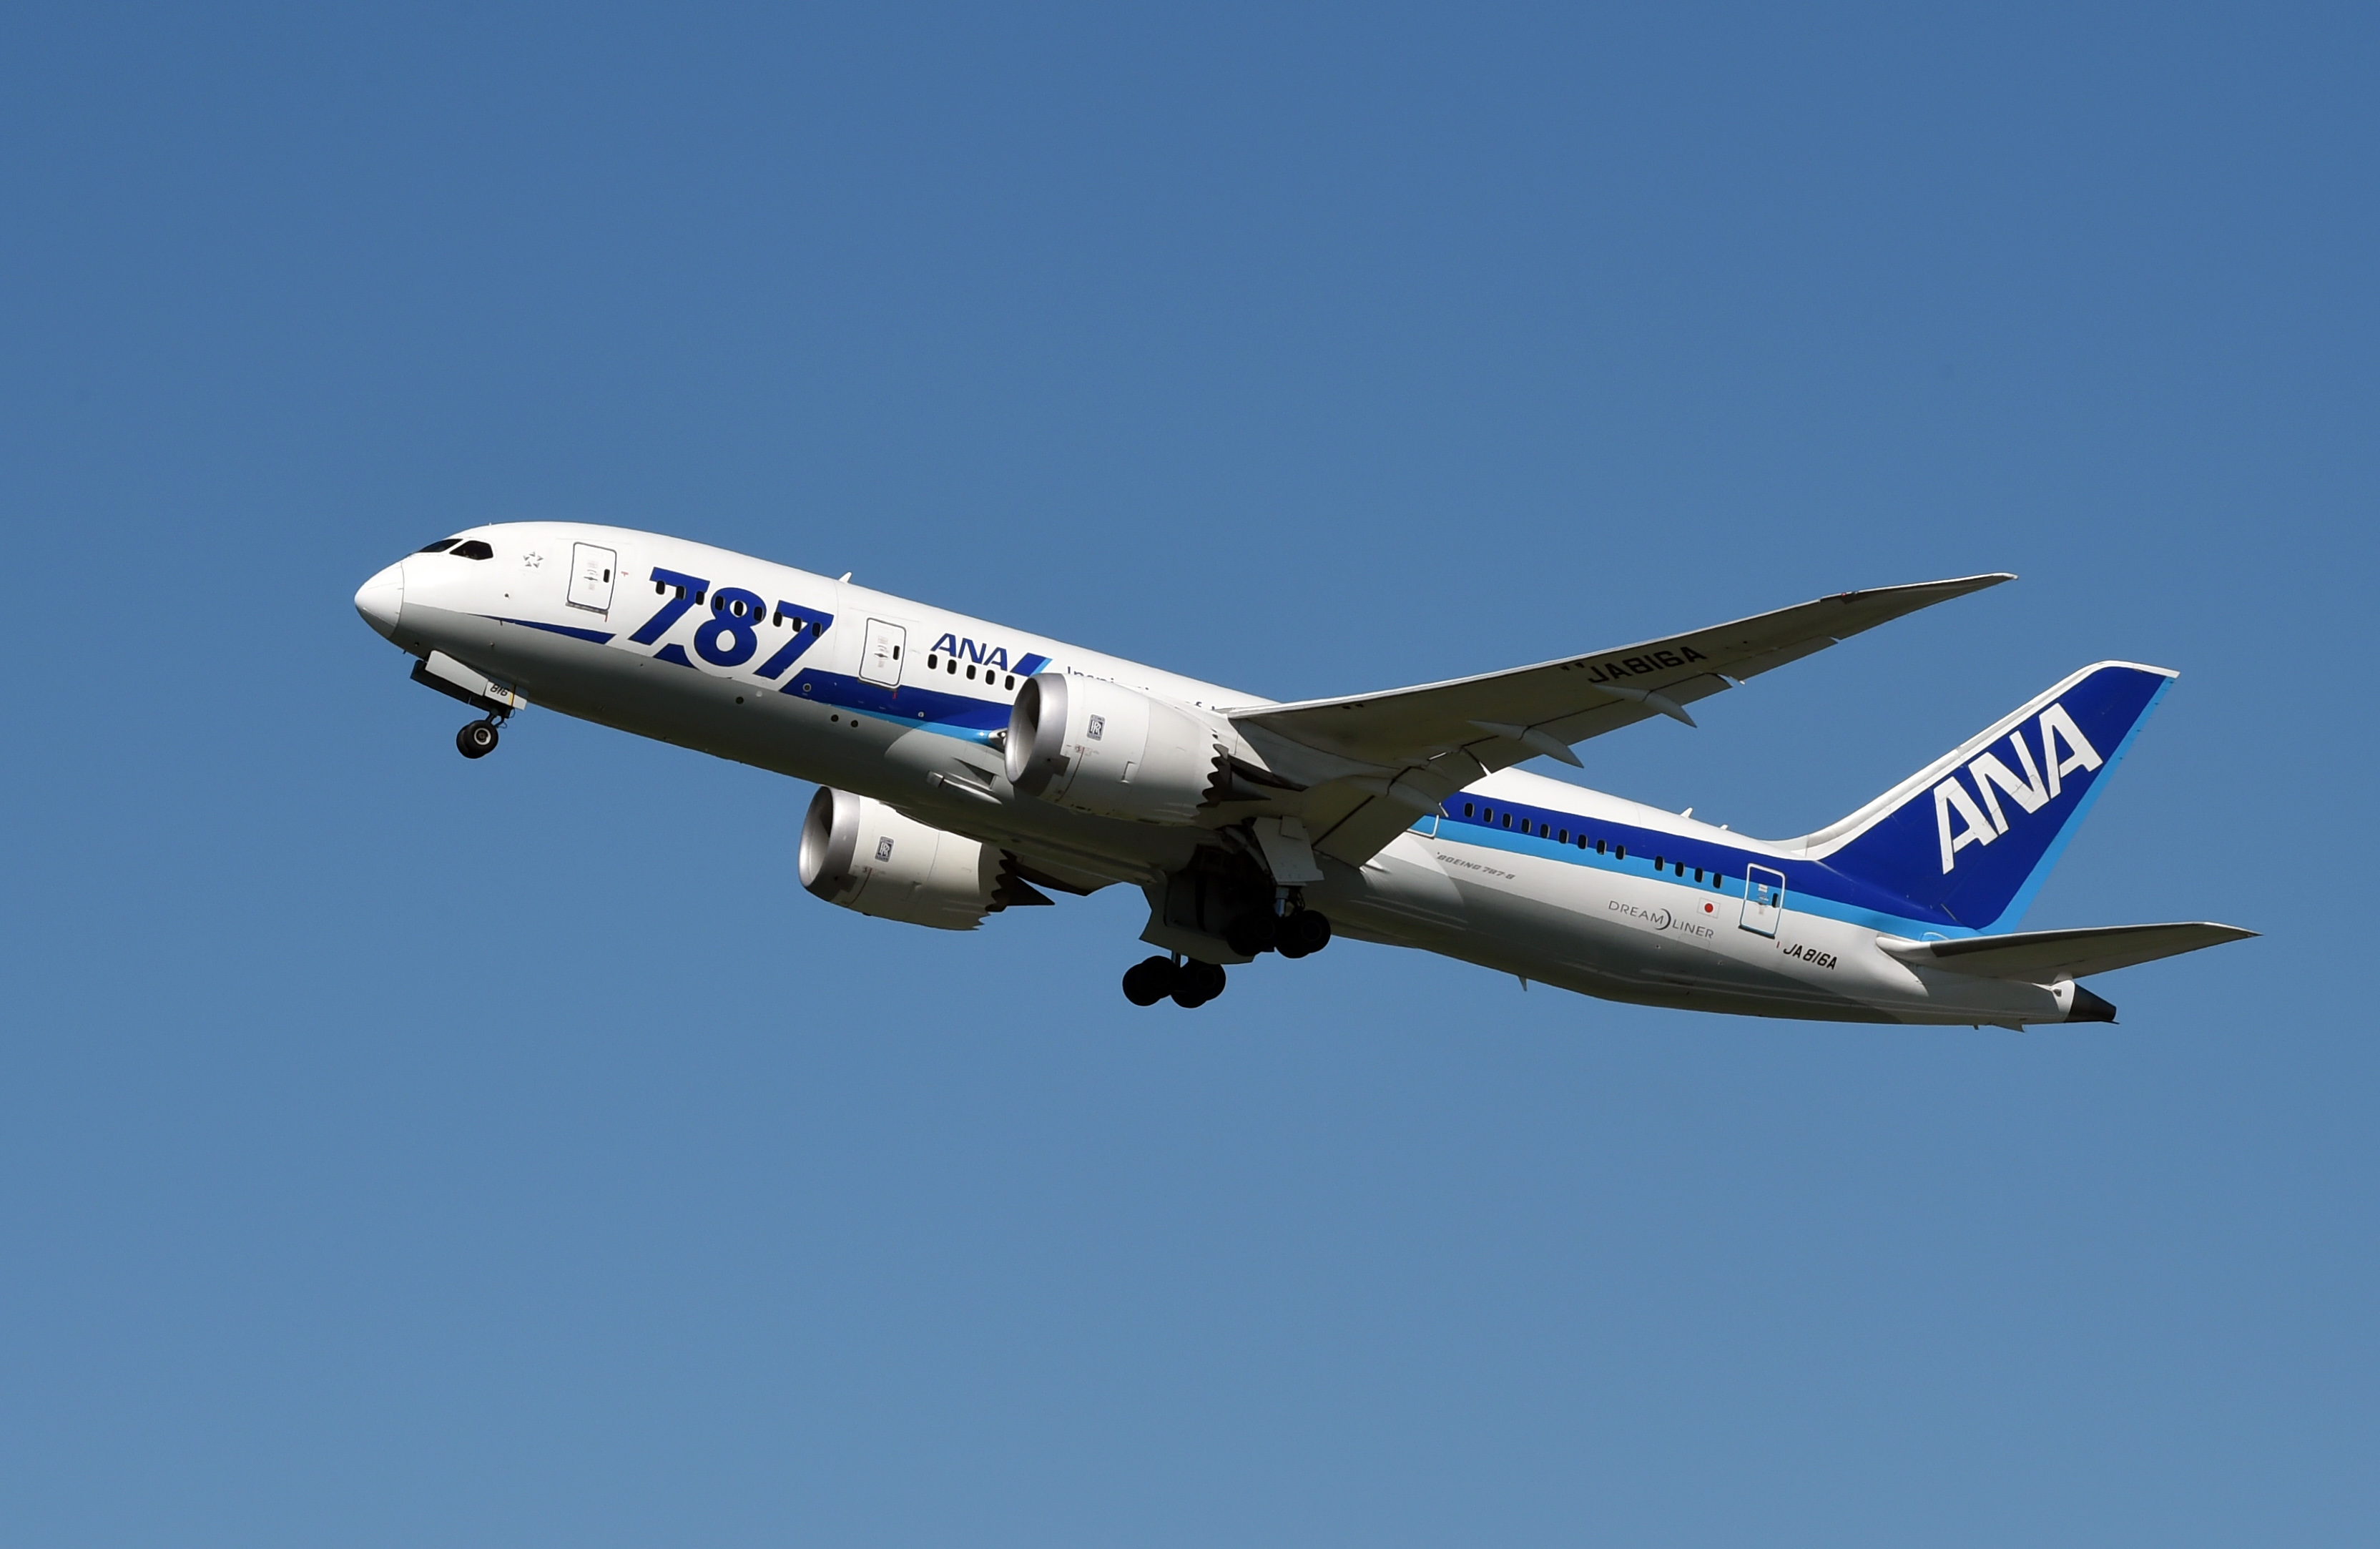 An All Nippon Airways (ANA) Boeing 787 passenger jet takes off from Haneda International Airport in Tokyo on July 14, 2015.                     AFP PHOTO / Toshifumi KITAMURA / AFP PHOTO / TOSHIFUMI KITAMURA